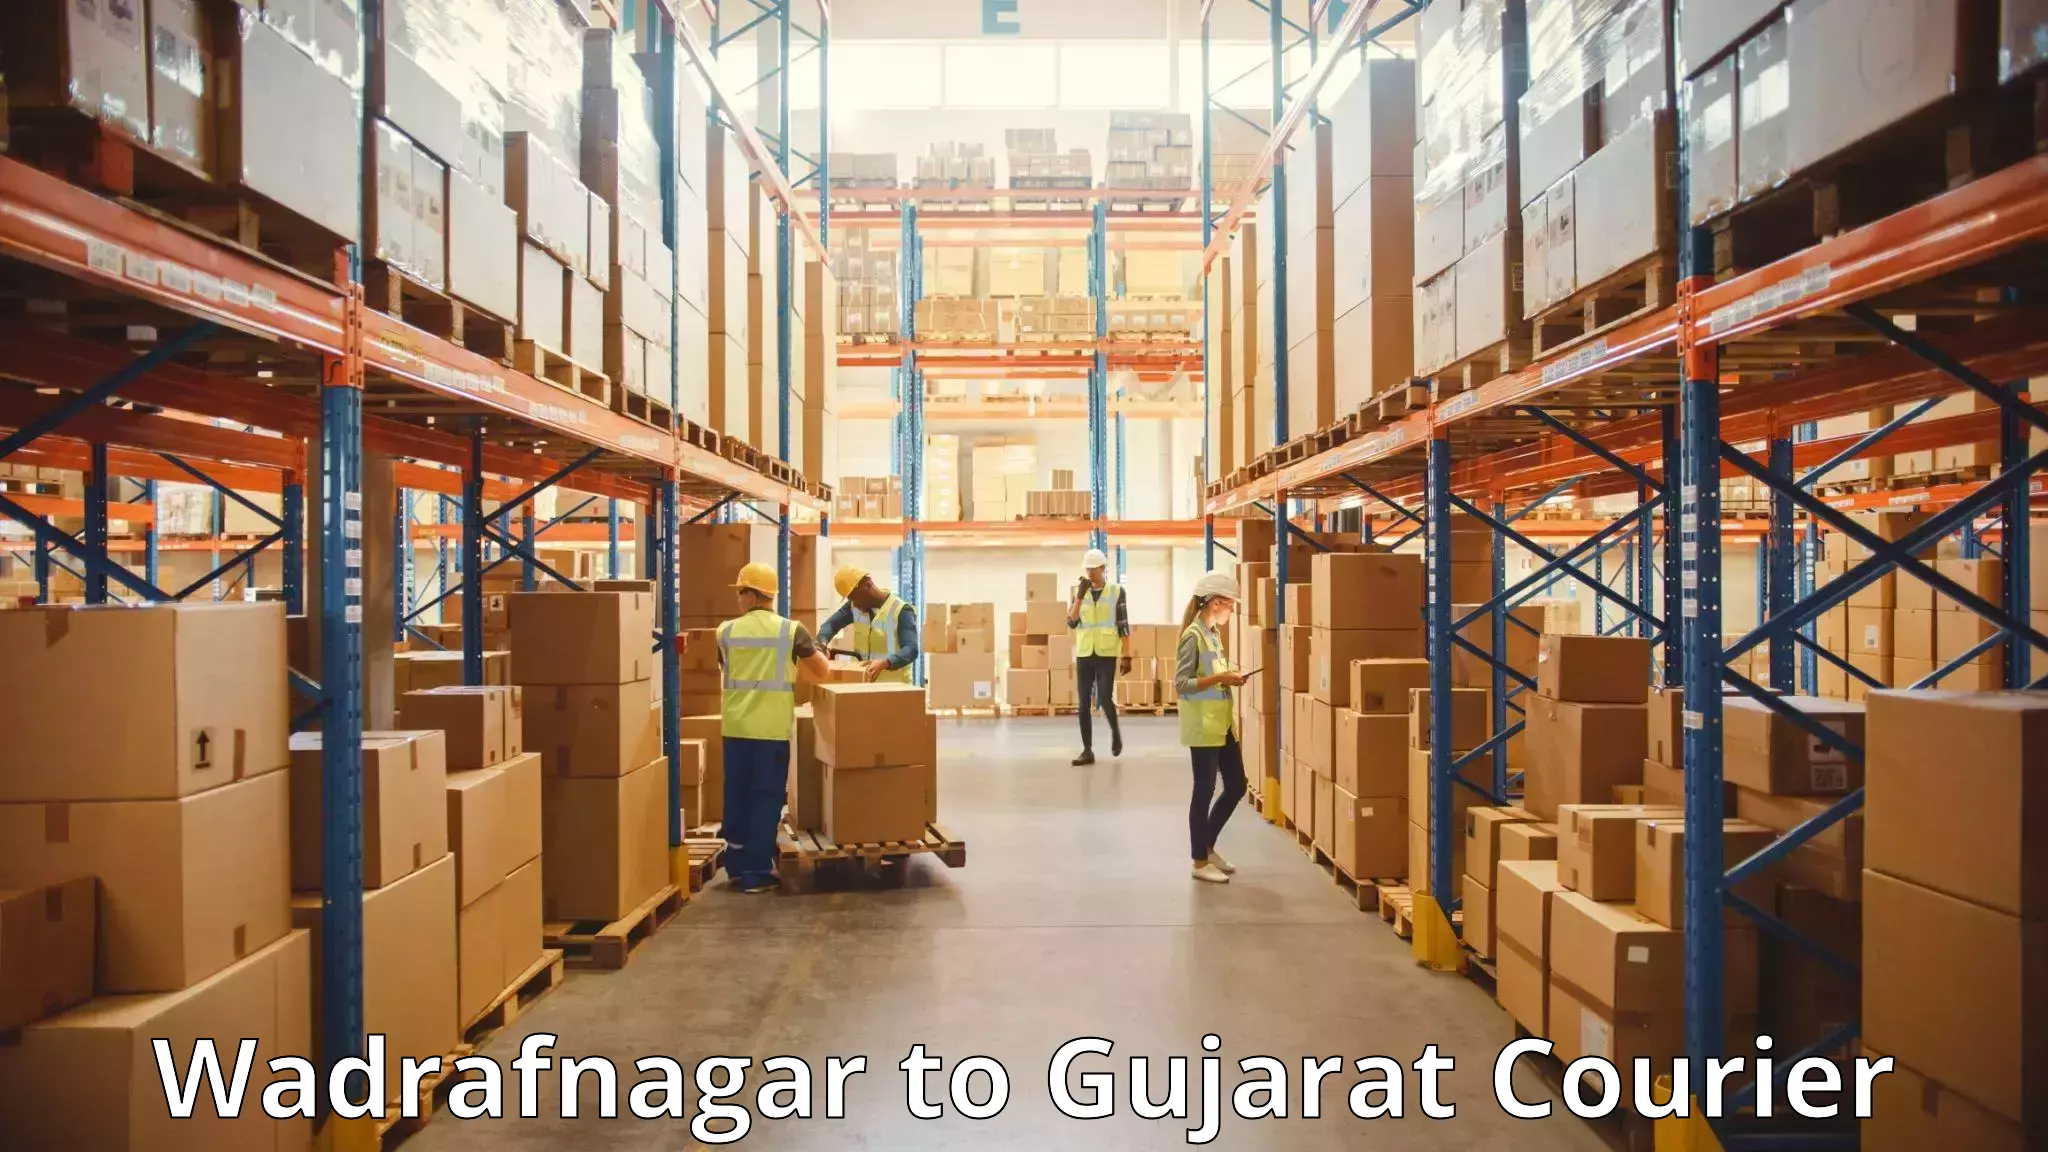 Instant baggage transport quote Wadrafnagar to Anand